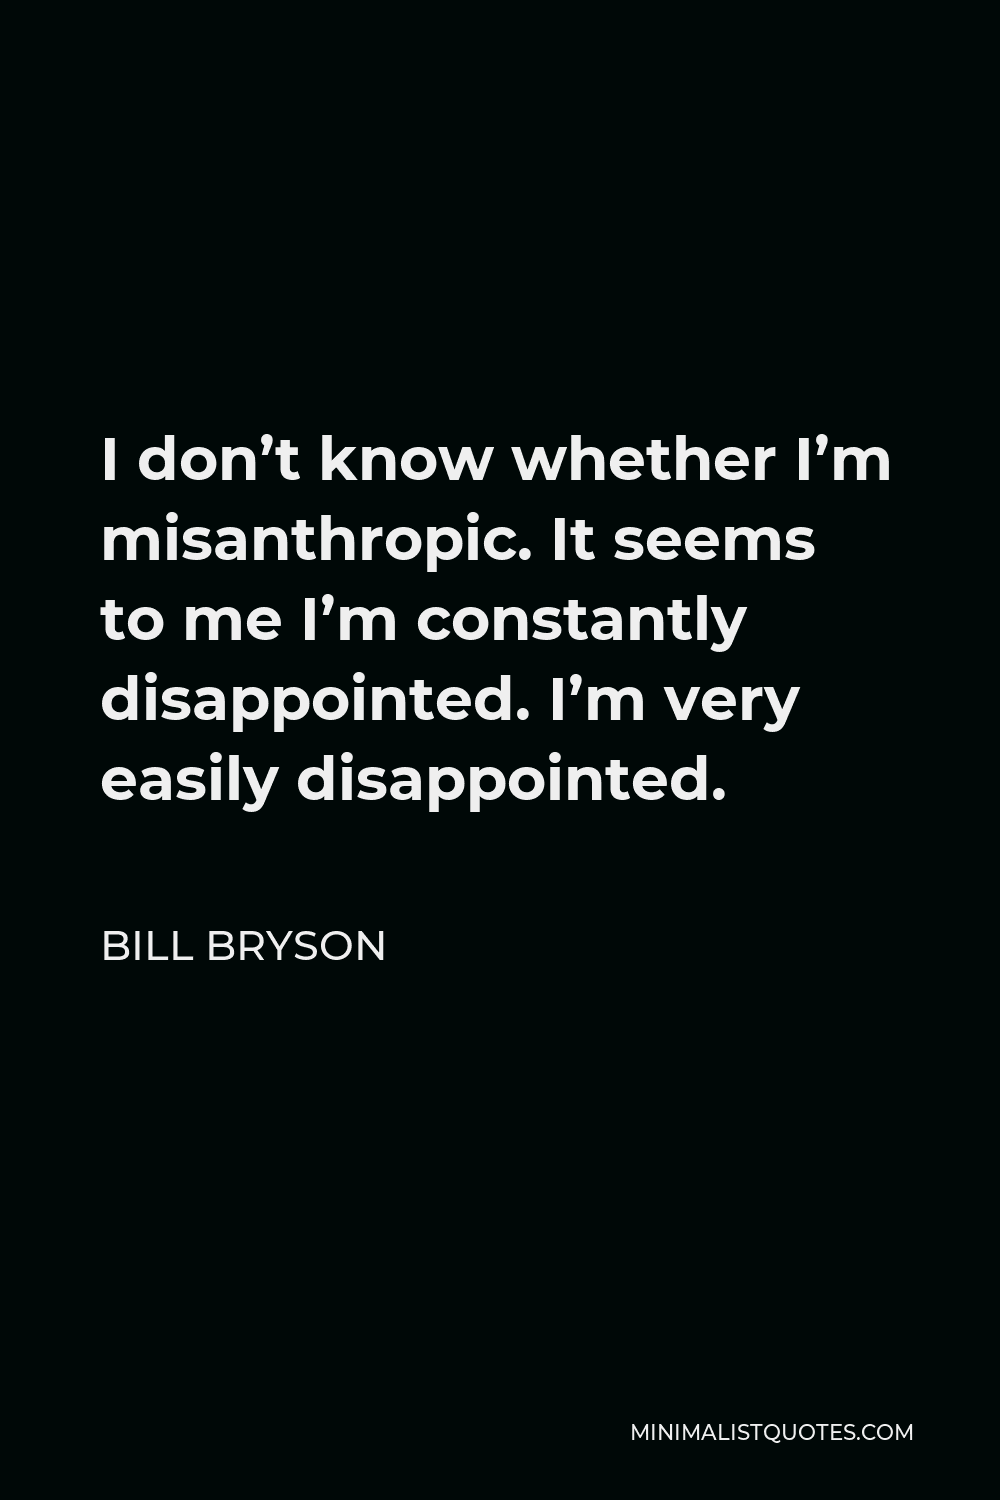 Bill Bryson Quote - I don’t know whether I’m misanthropic. It seems to me I’m constantly disappointed. I’m very easily disappointed.